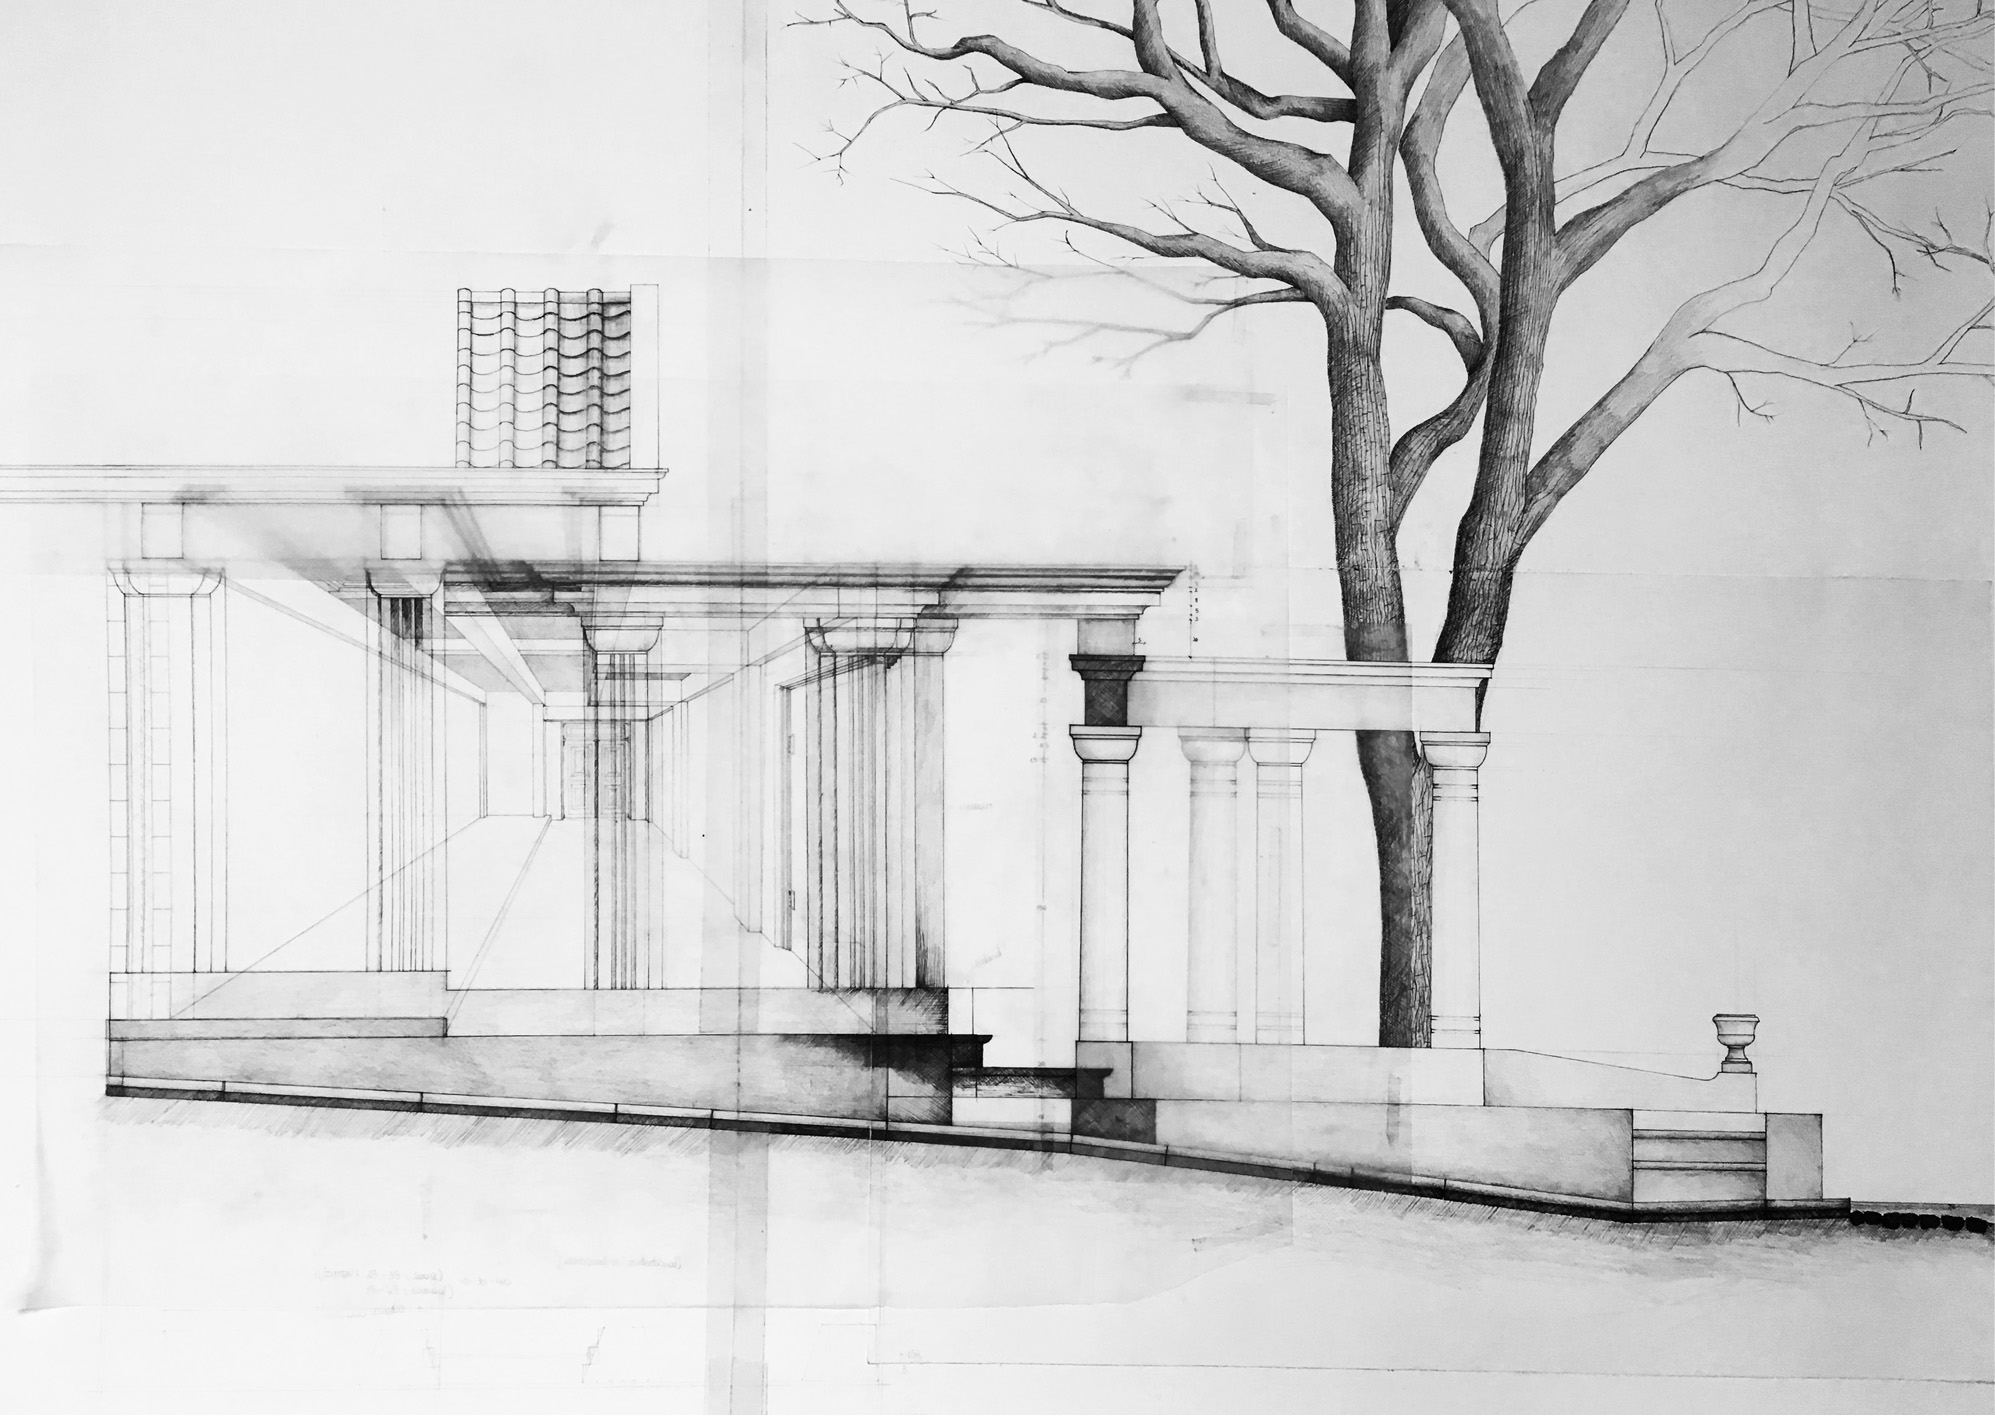 Facade section one point perspective drawing, scale 1:10, pencil and pen on tracing paper and paper